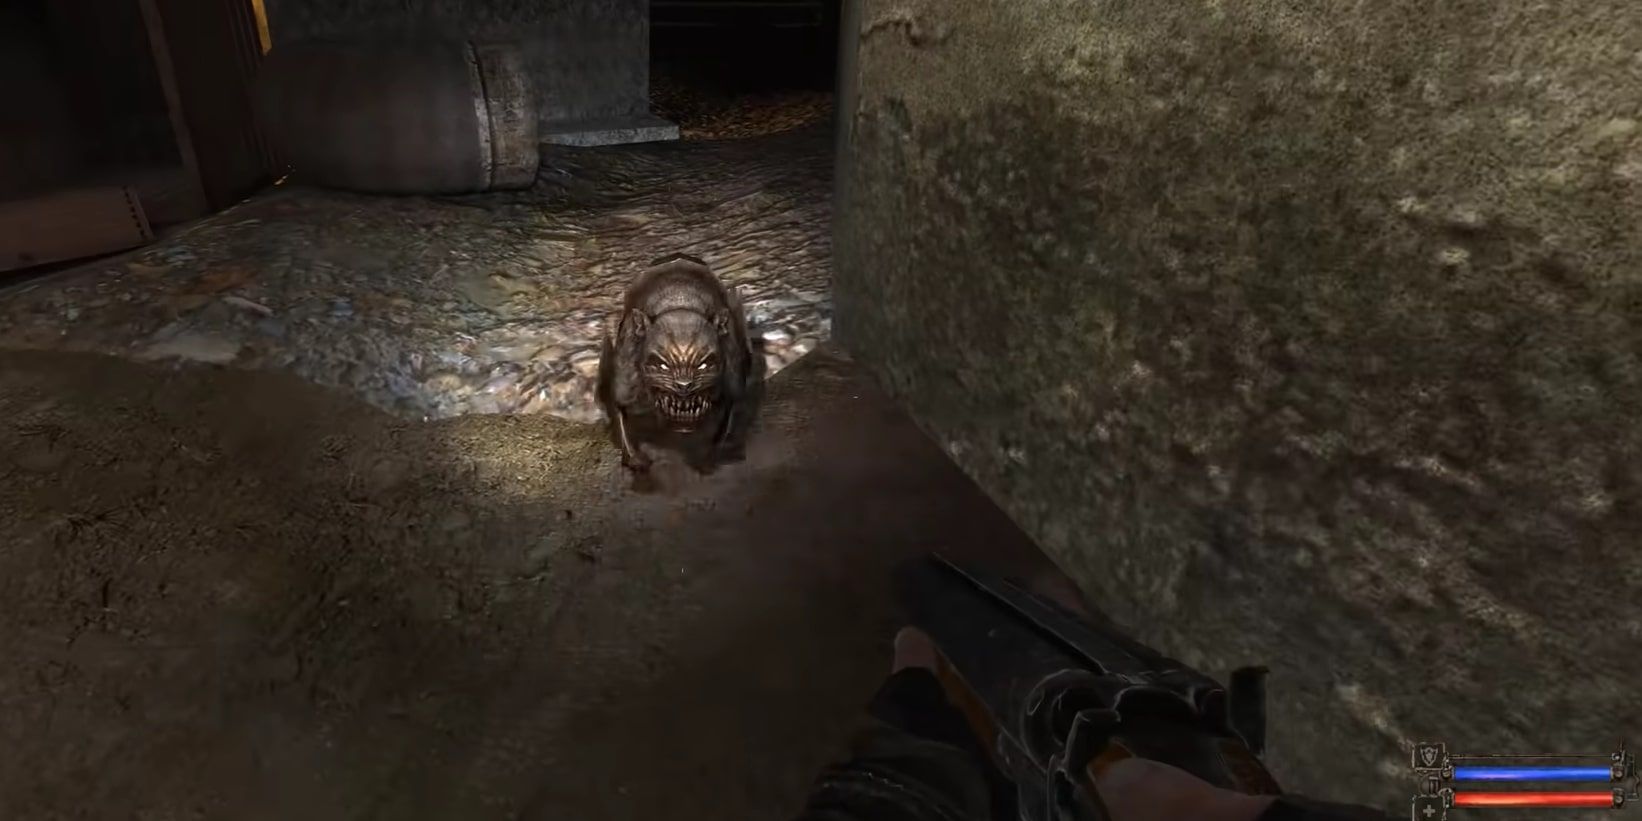 Main protagonist pointing a shotgun at a mutant animal creature in a dark environment in Stalker.